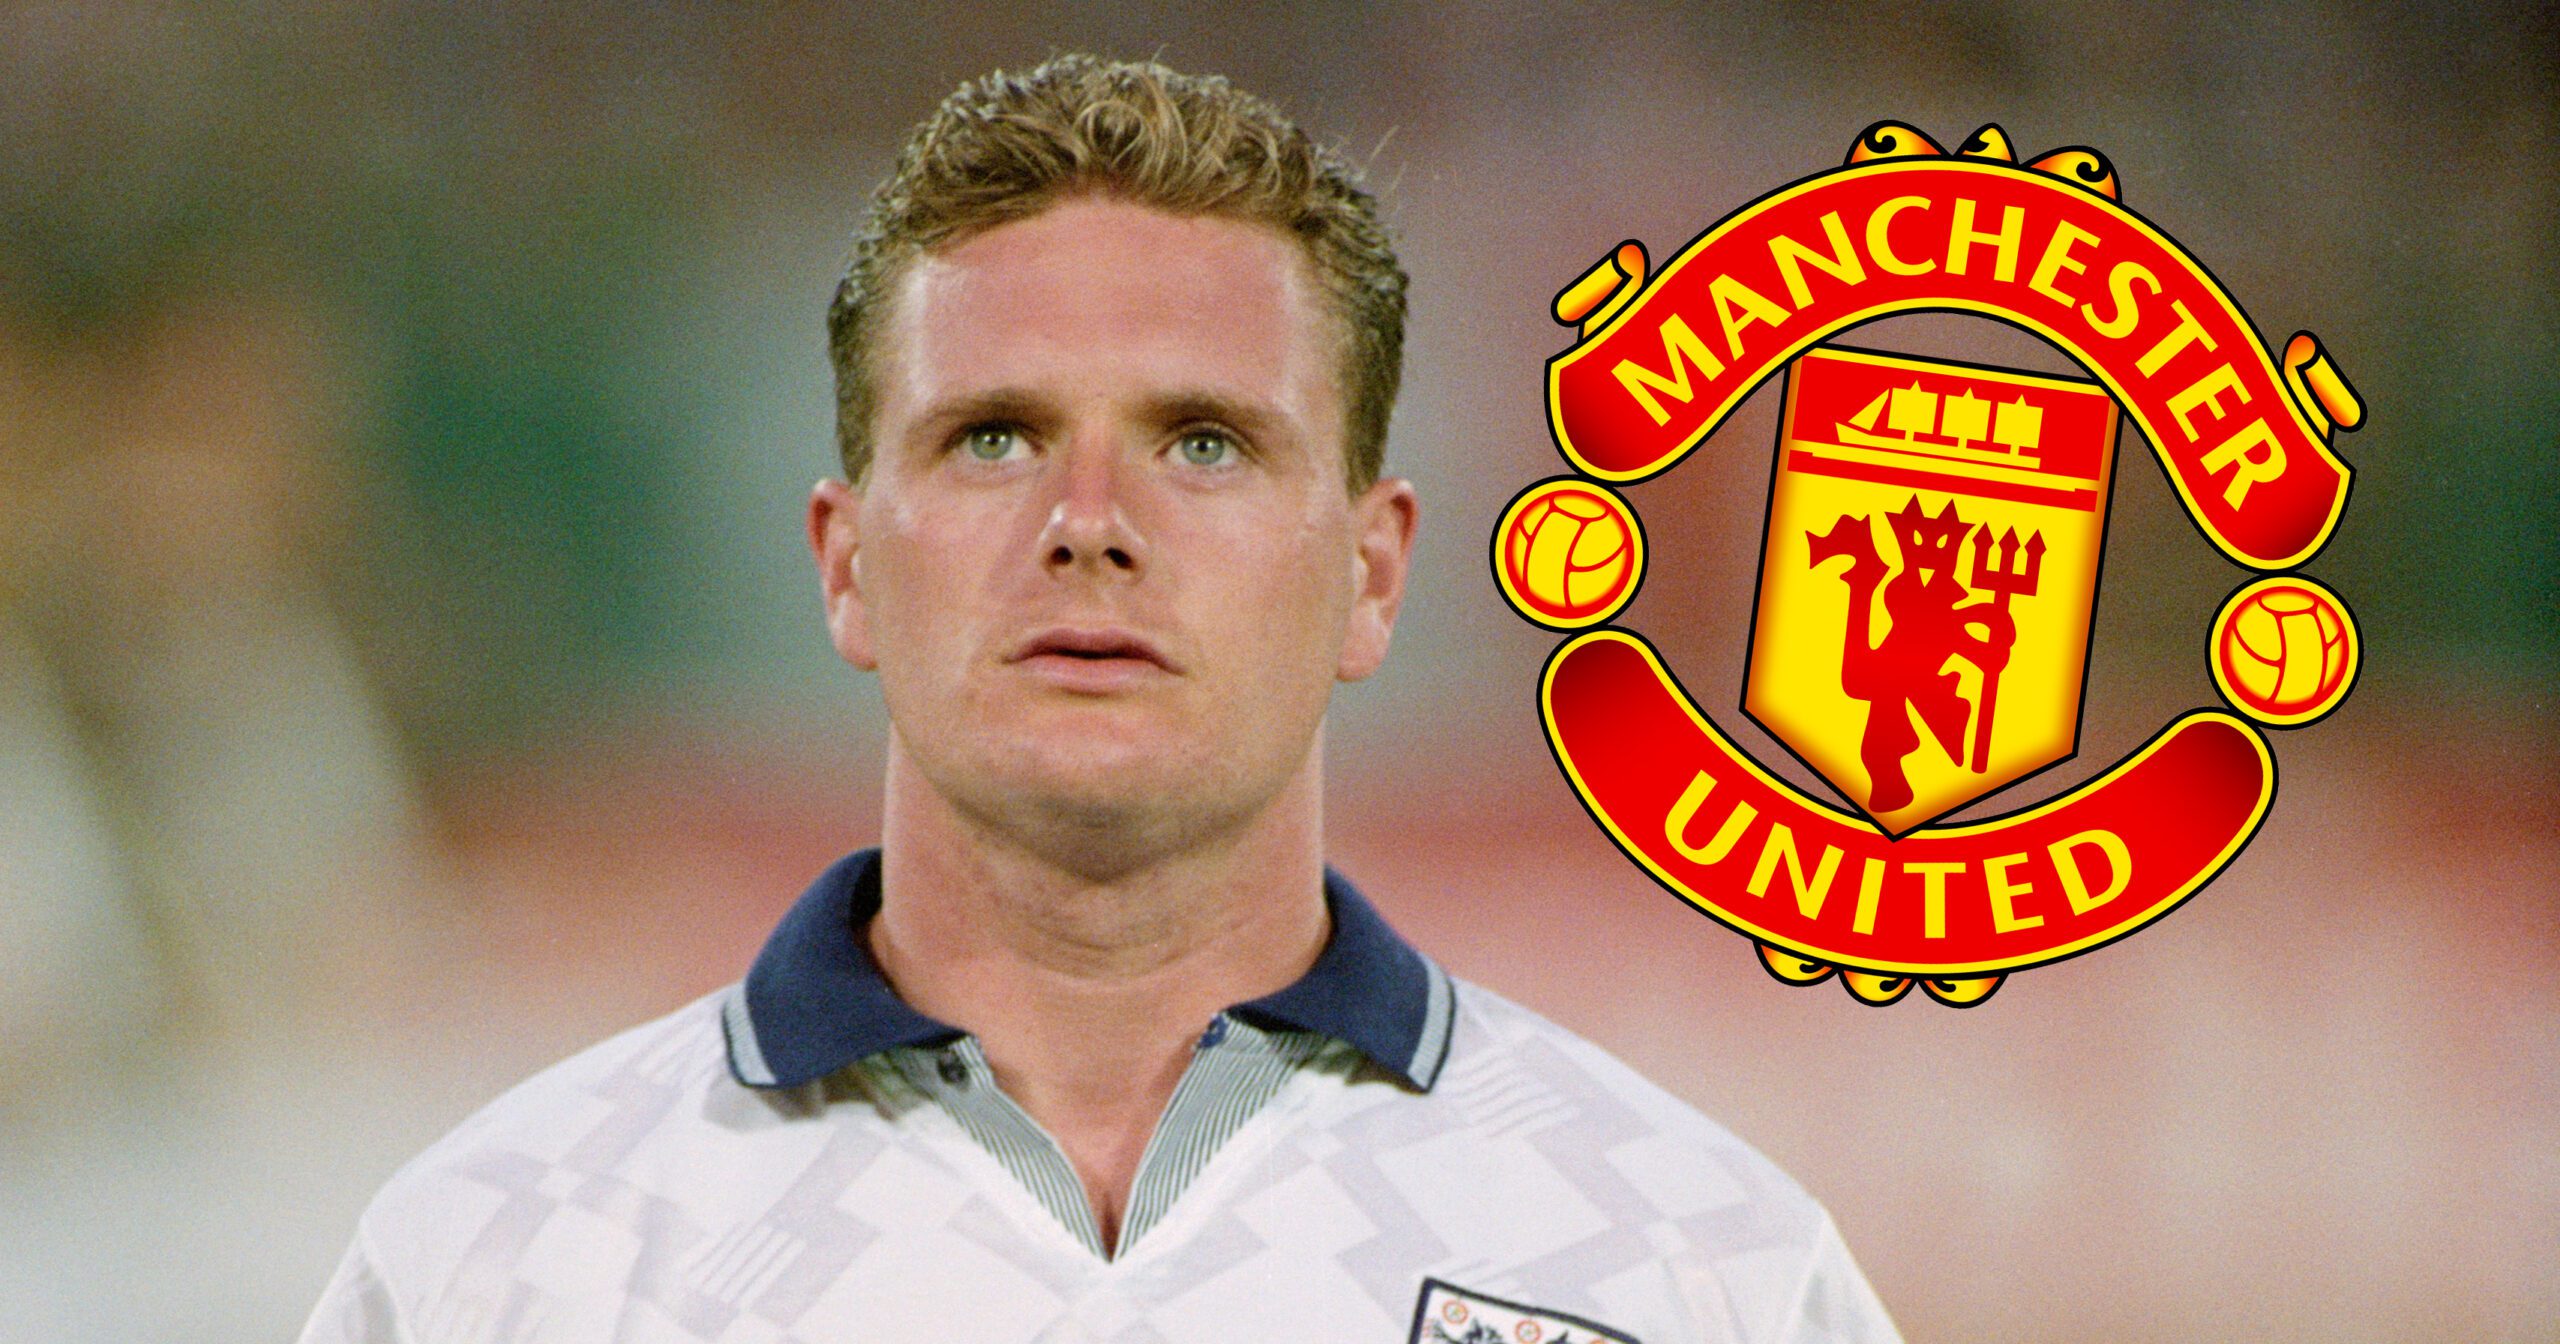 Paul Gascoigne could have signed for Manchester United: But Chris Waddle convinced him not to for one BIG reason